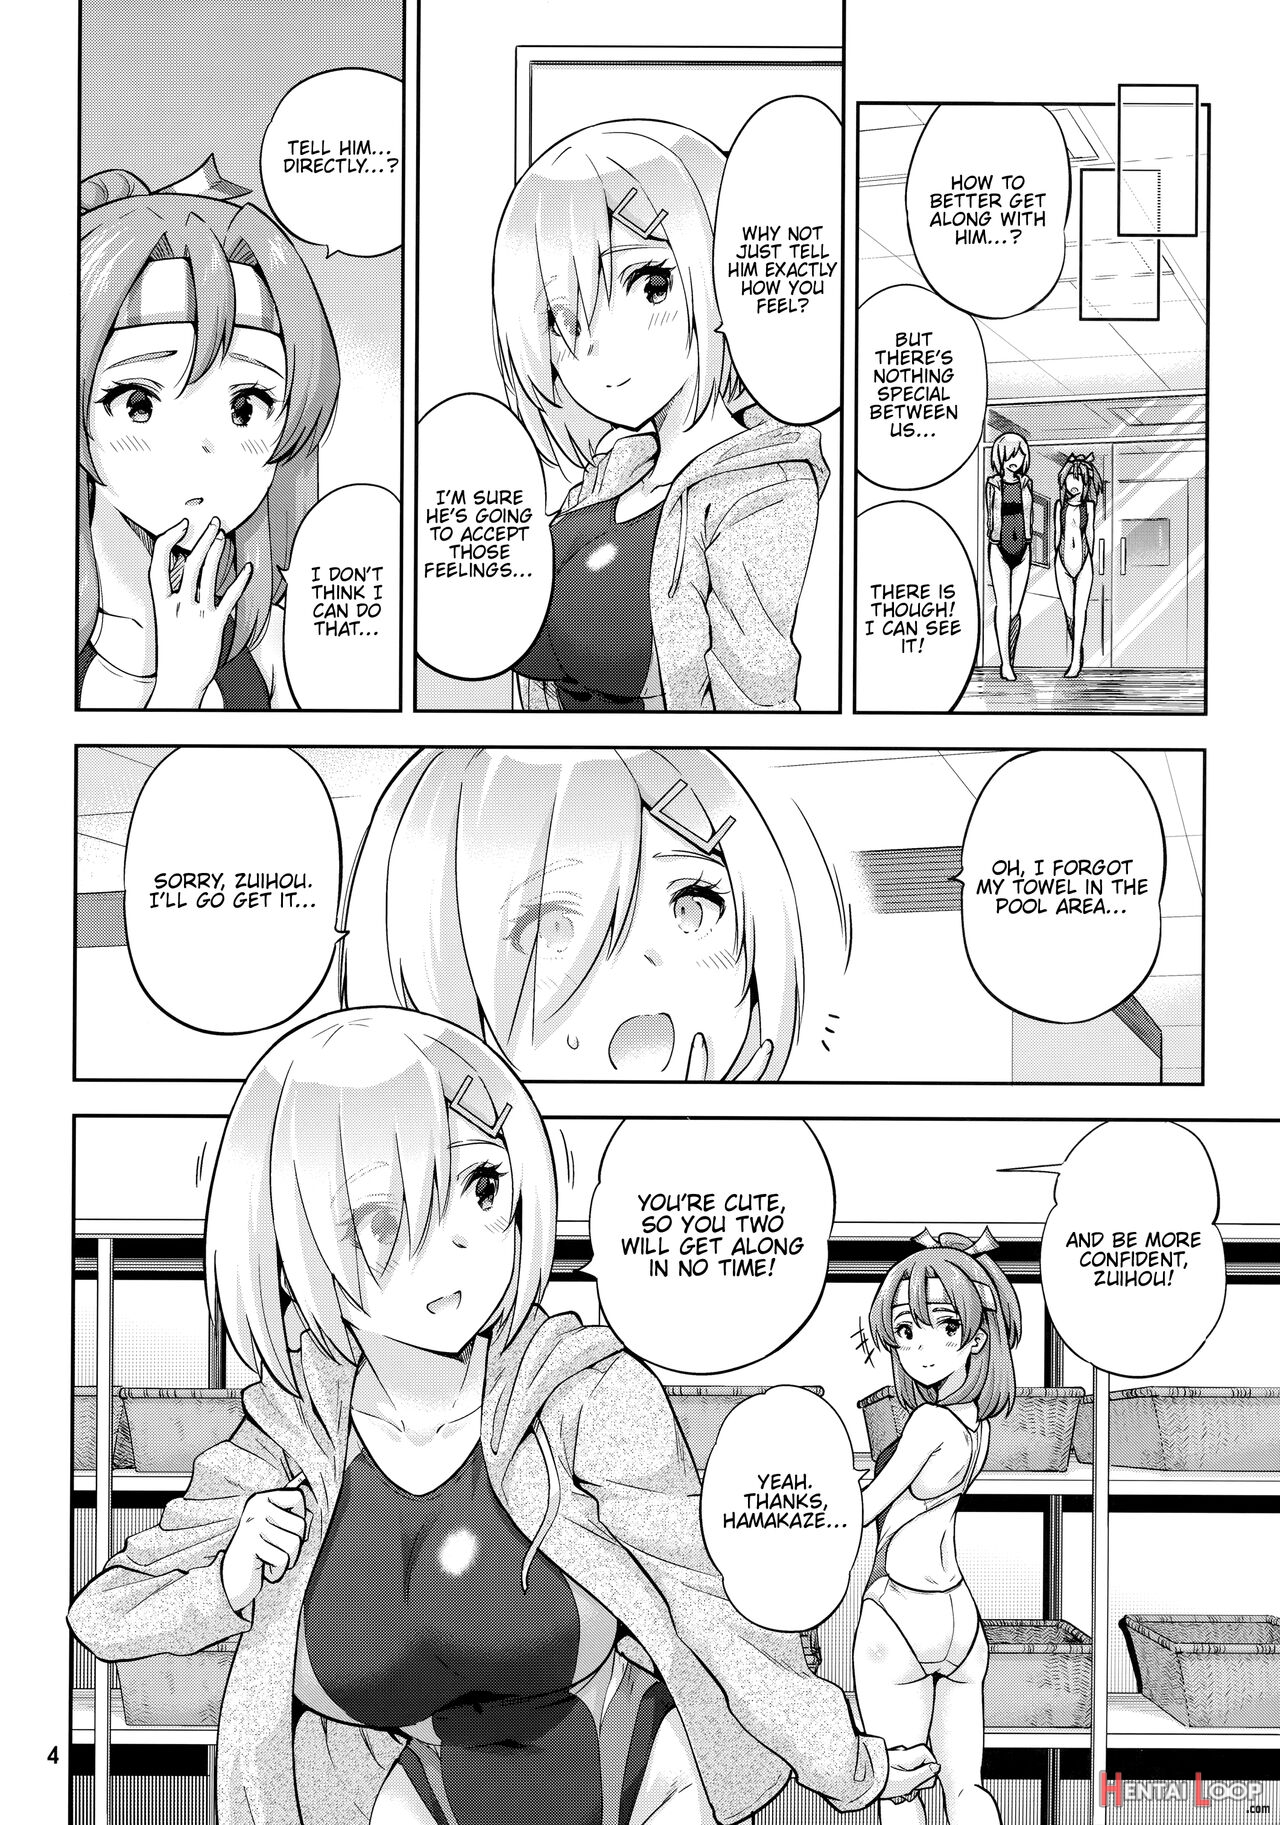 Zuihou And Hamakaze In Racing Swimsuits. page 6